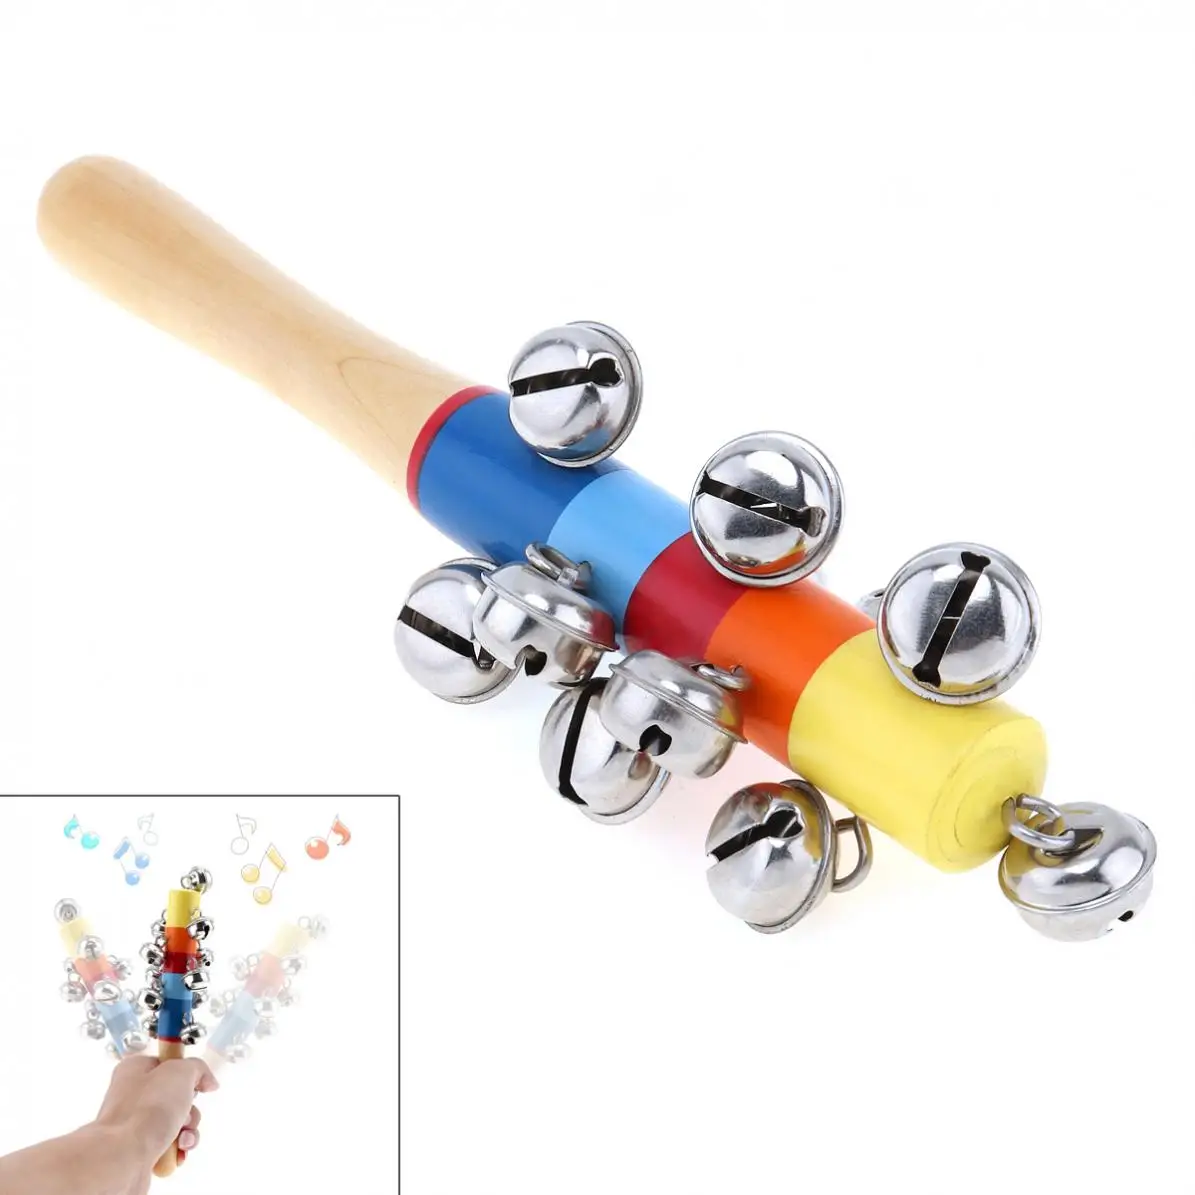 Onefont STSUNEU 3Pcs Colorful Wooden Hand Jingle Bells Rainbow Hand Bells for Kids Christmas Music Jingle Bell Toy Hand Percussion Shaker Bells 